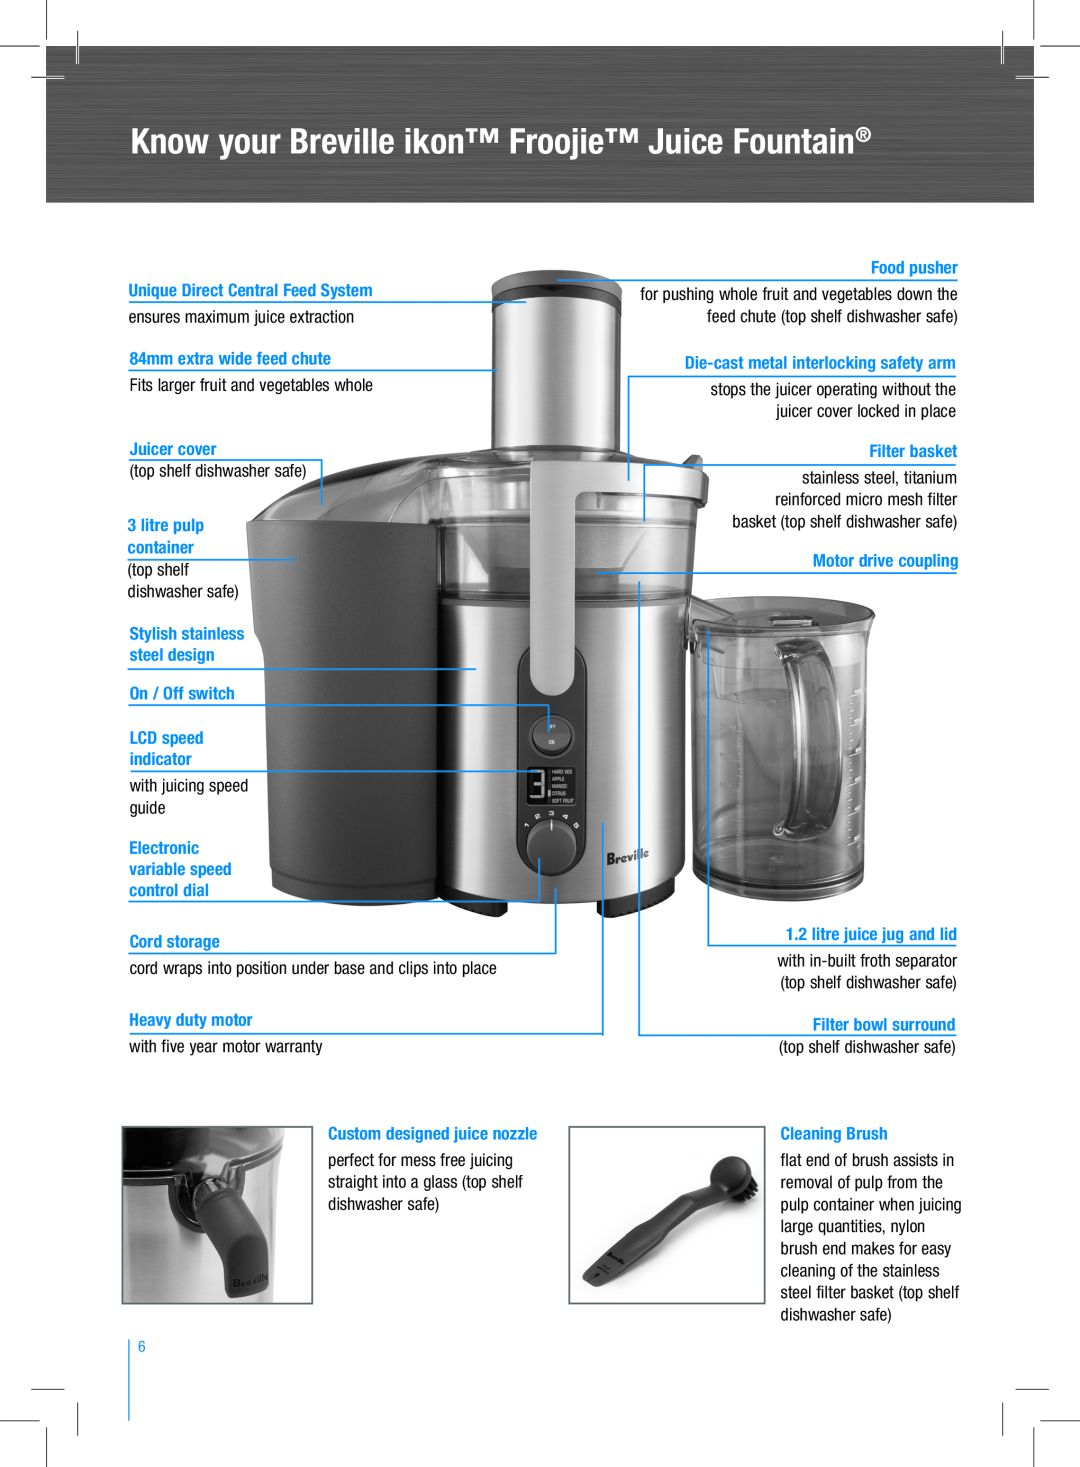 Breville BJE520 manual Know your Breville ikon Froojie Juice Fountain, Unique Direct Central Feed System, Juicer cover 